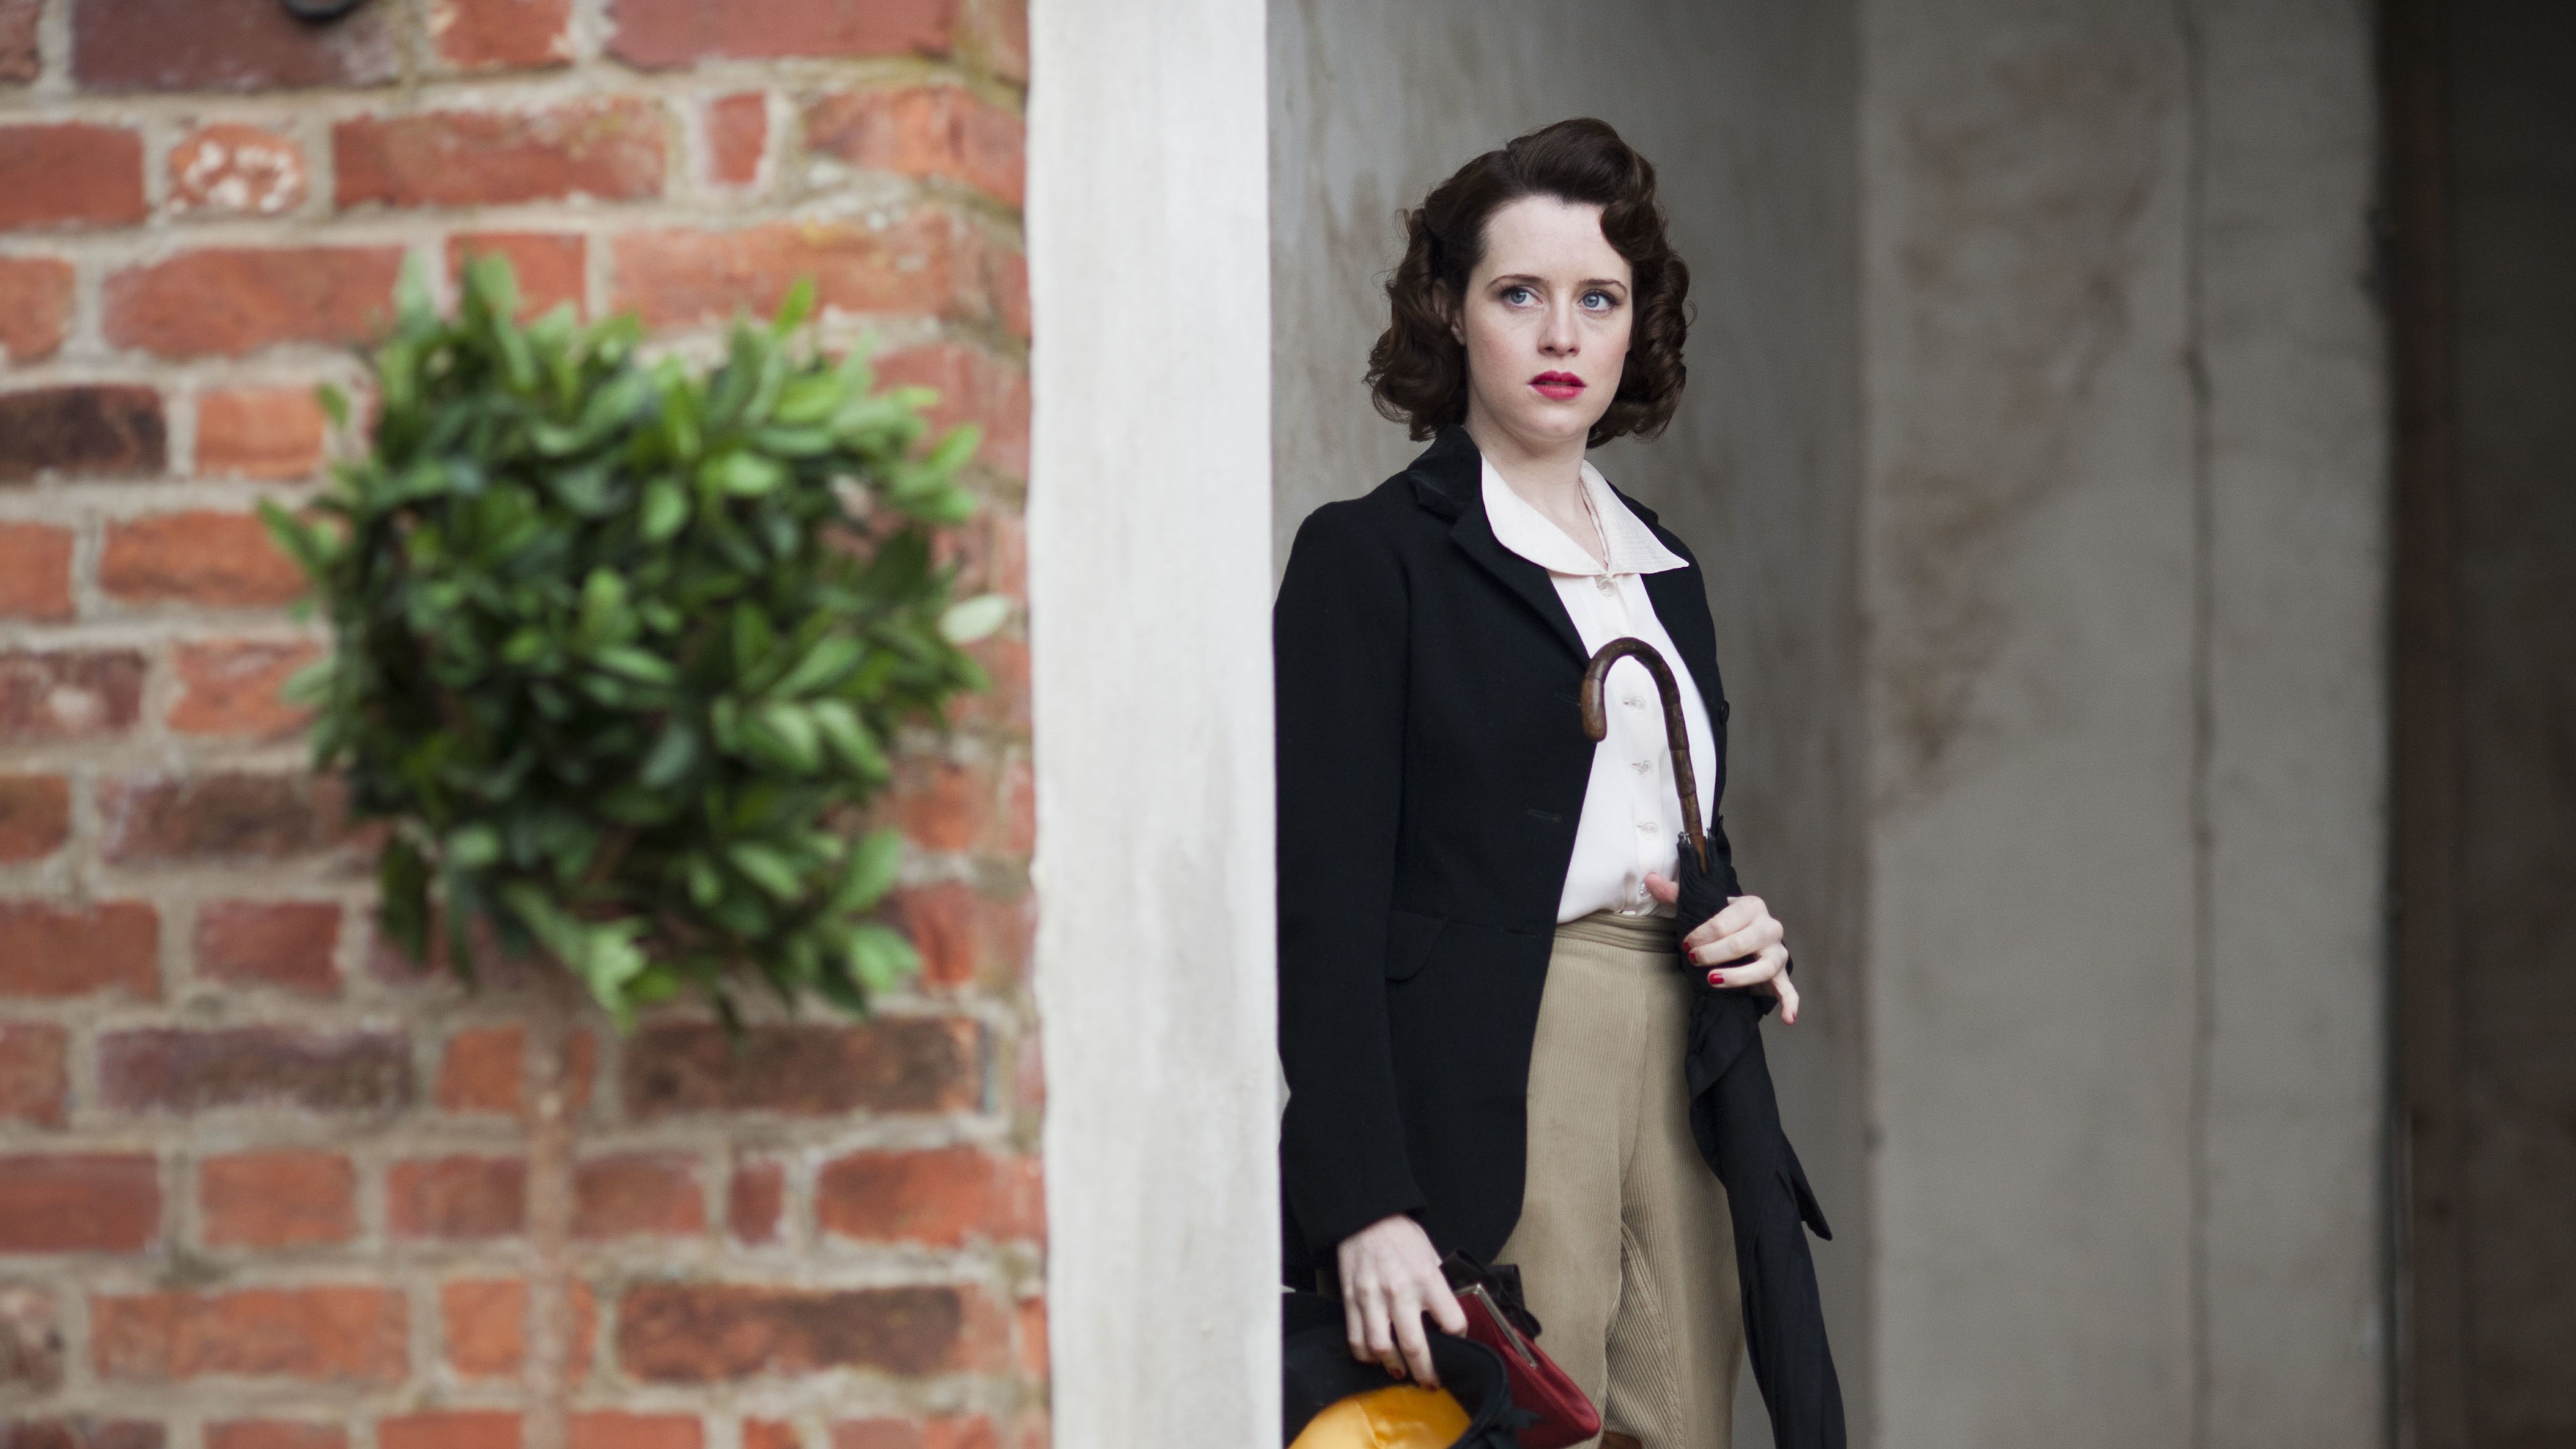 Claire Foy The Crown Actress 5K Wallpaper, HD Celebrities 4K Wallpaper, Image, Photo and Background